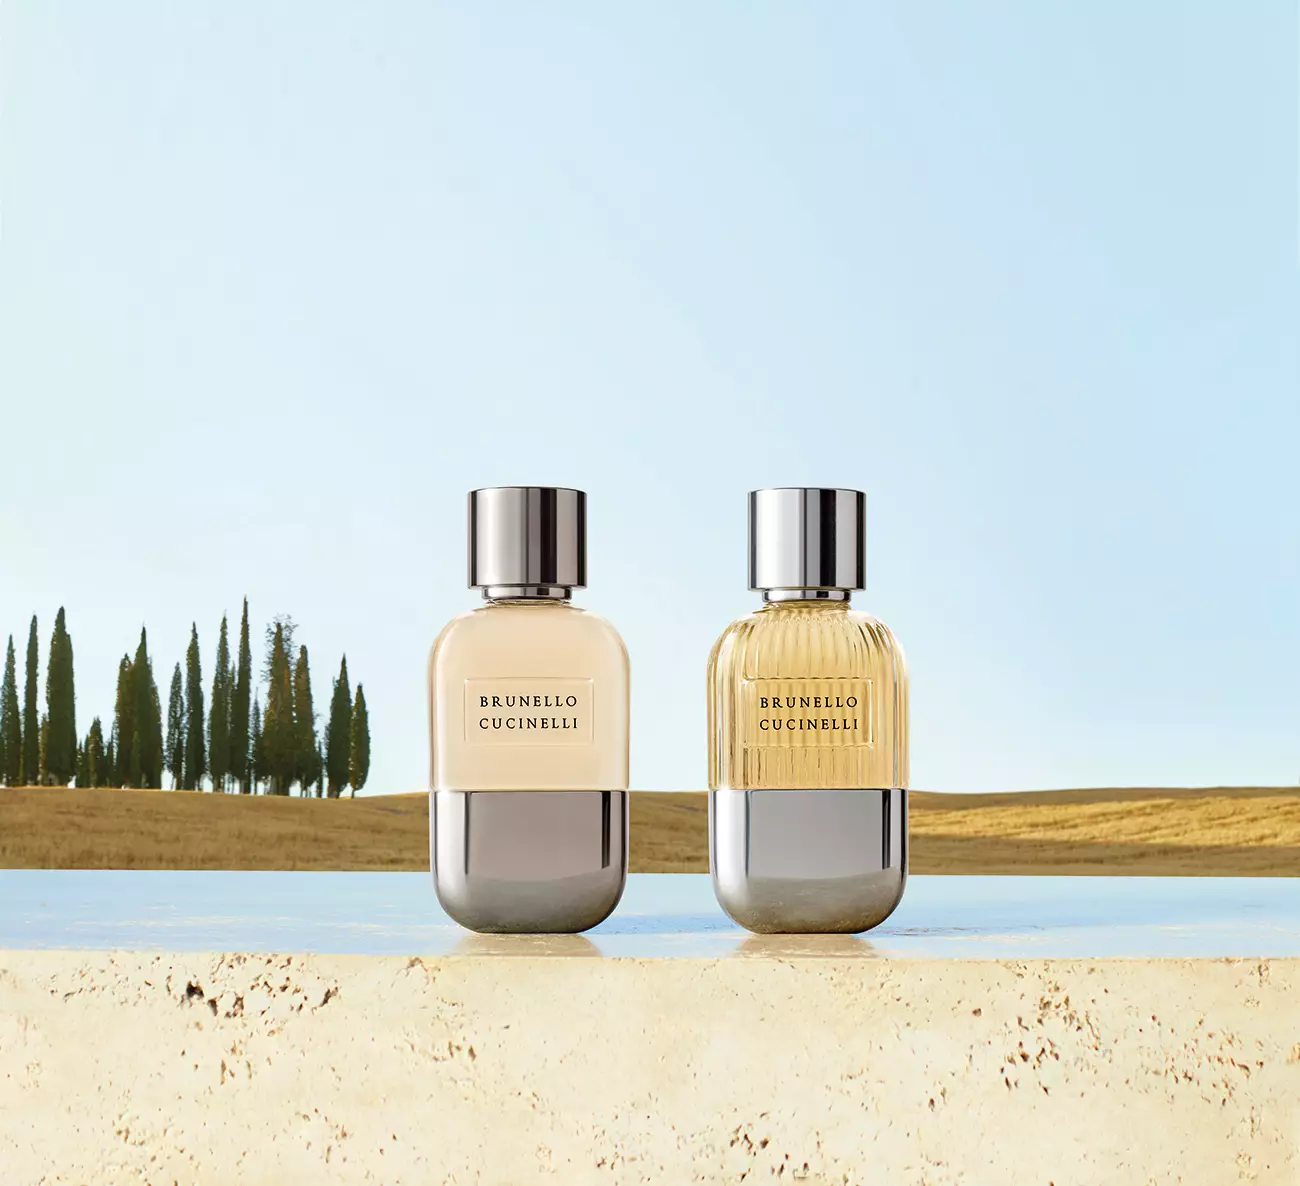 Brunello Cucinelli introduces first fragrances for men and women